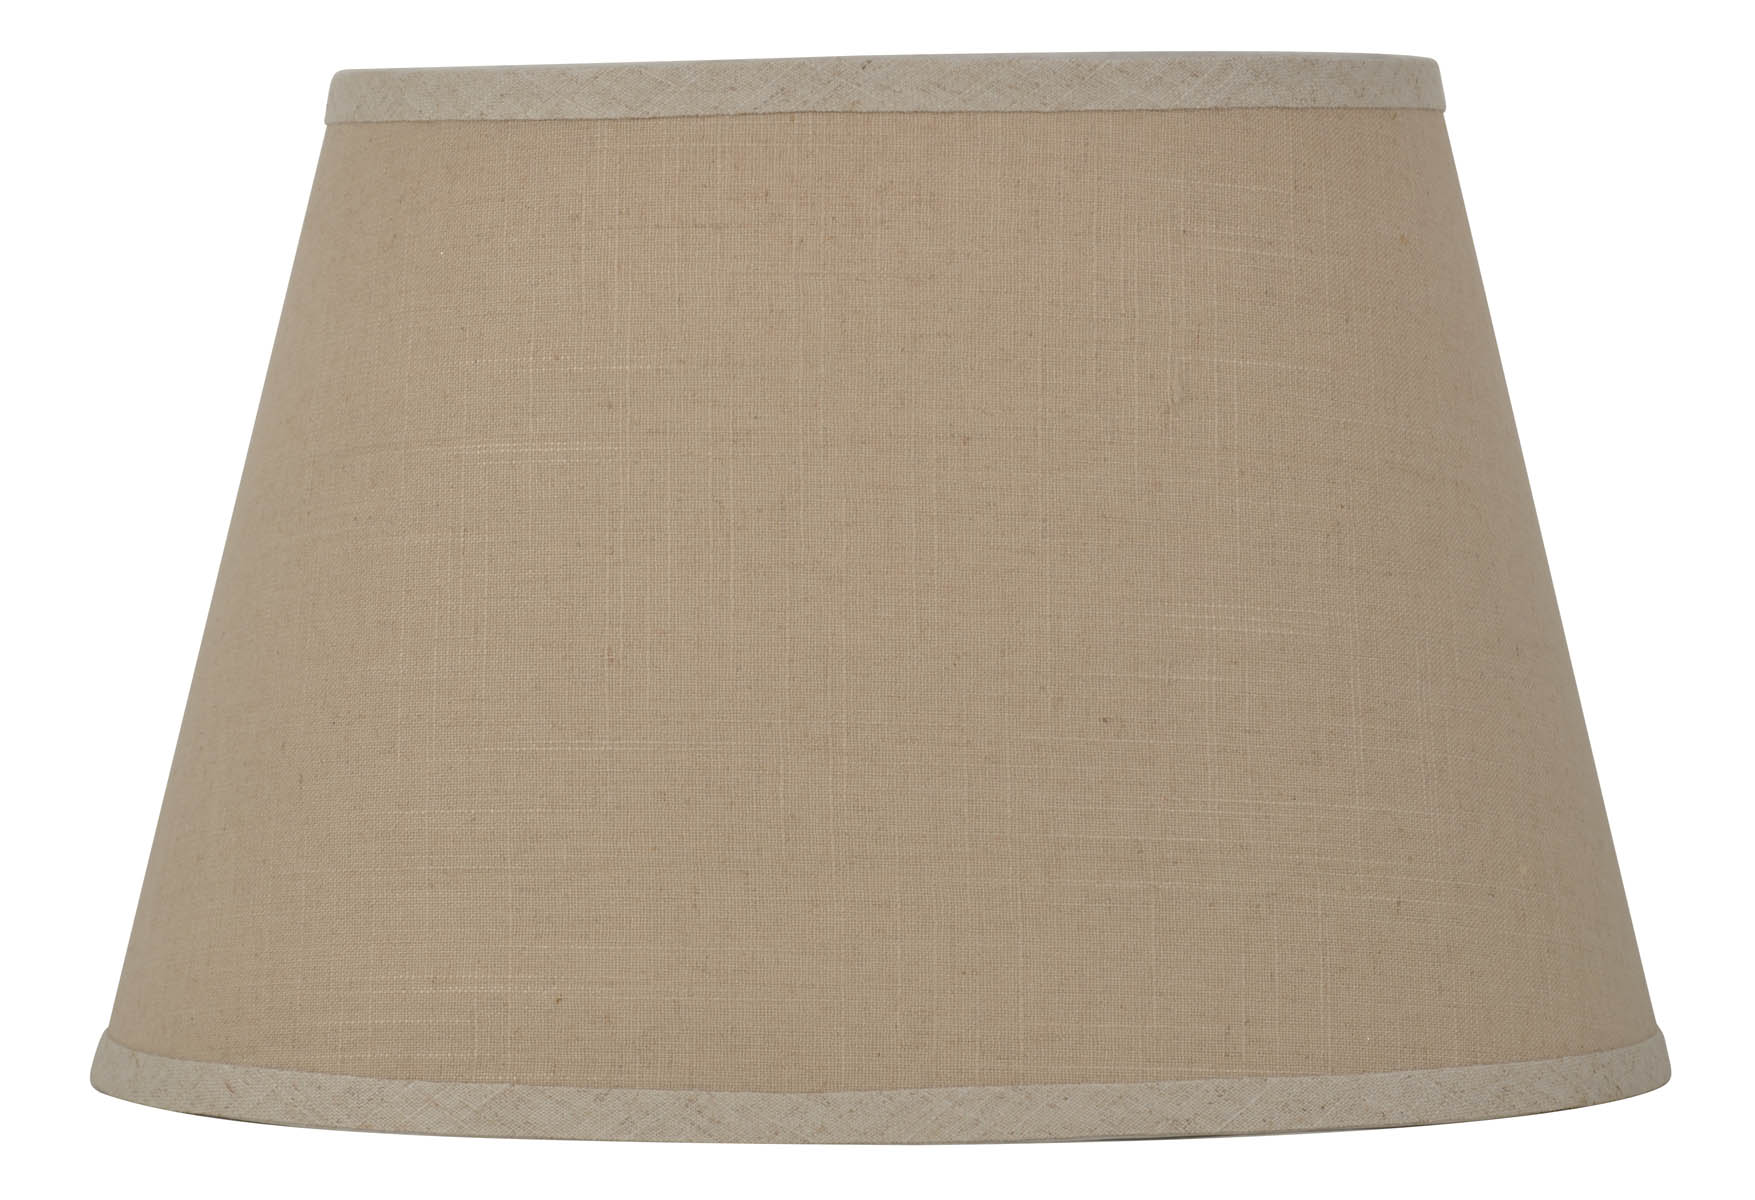 allen + roth 10.5-in x 16-in Tan Fabric Drum Lamp Shade at Lowes.com